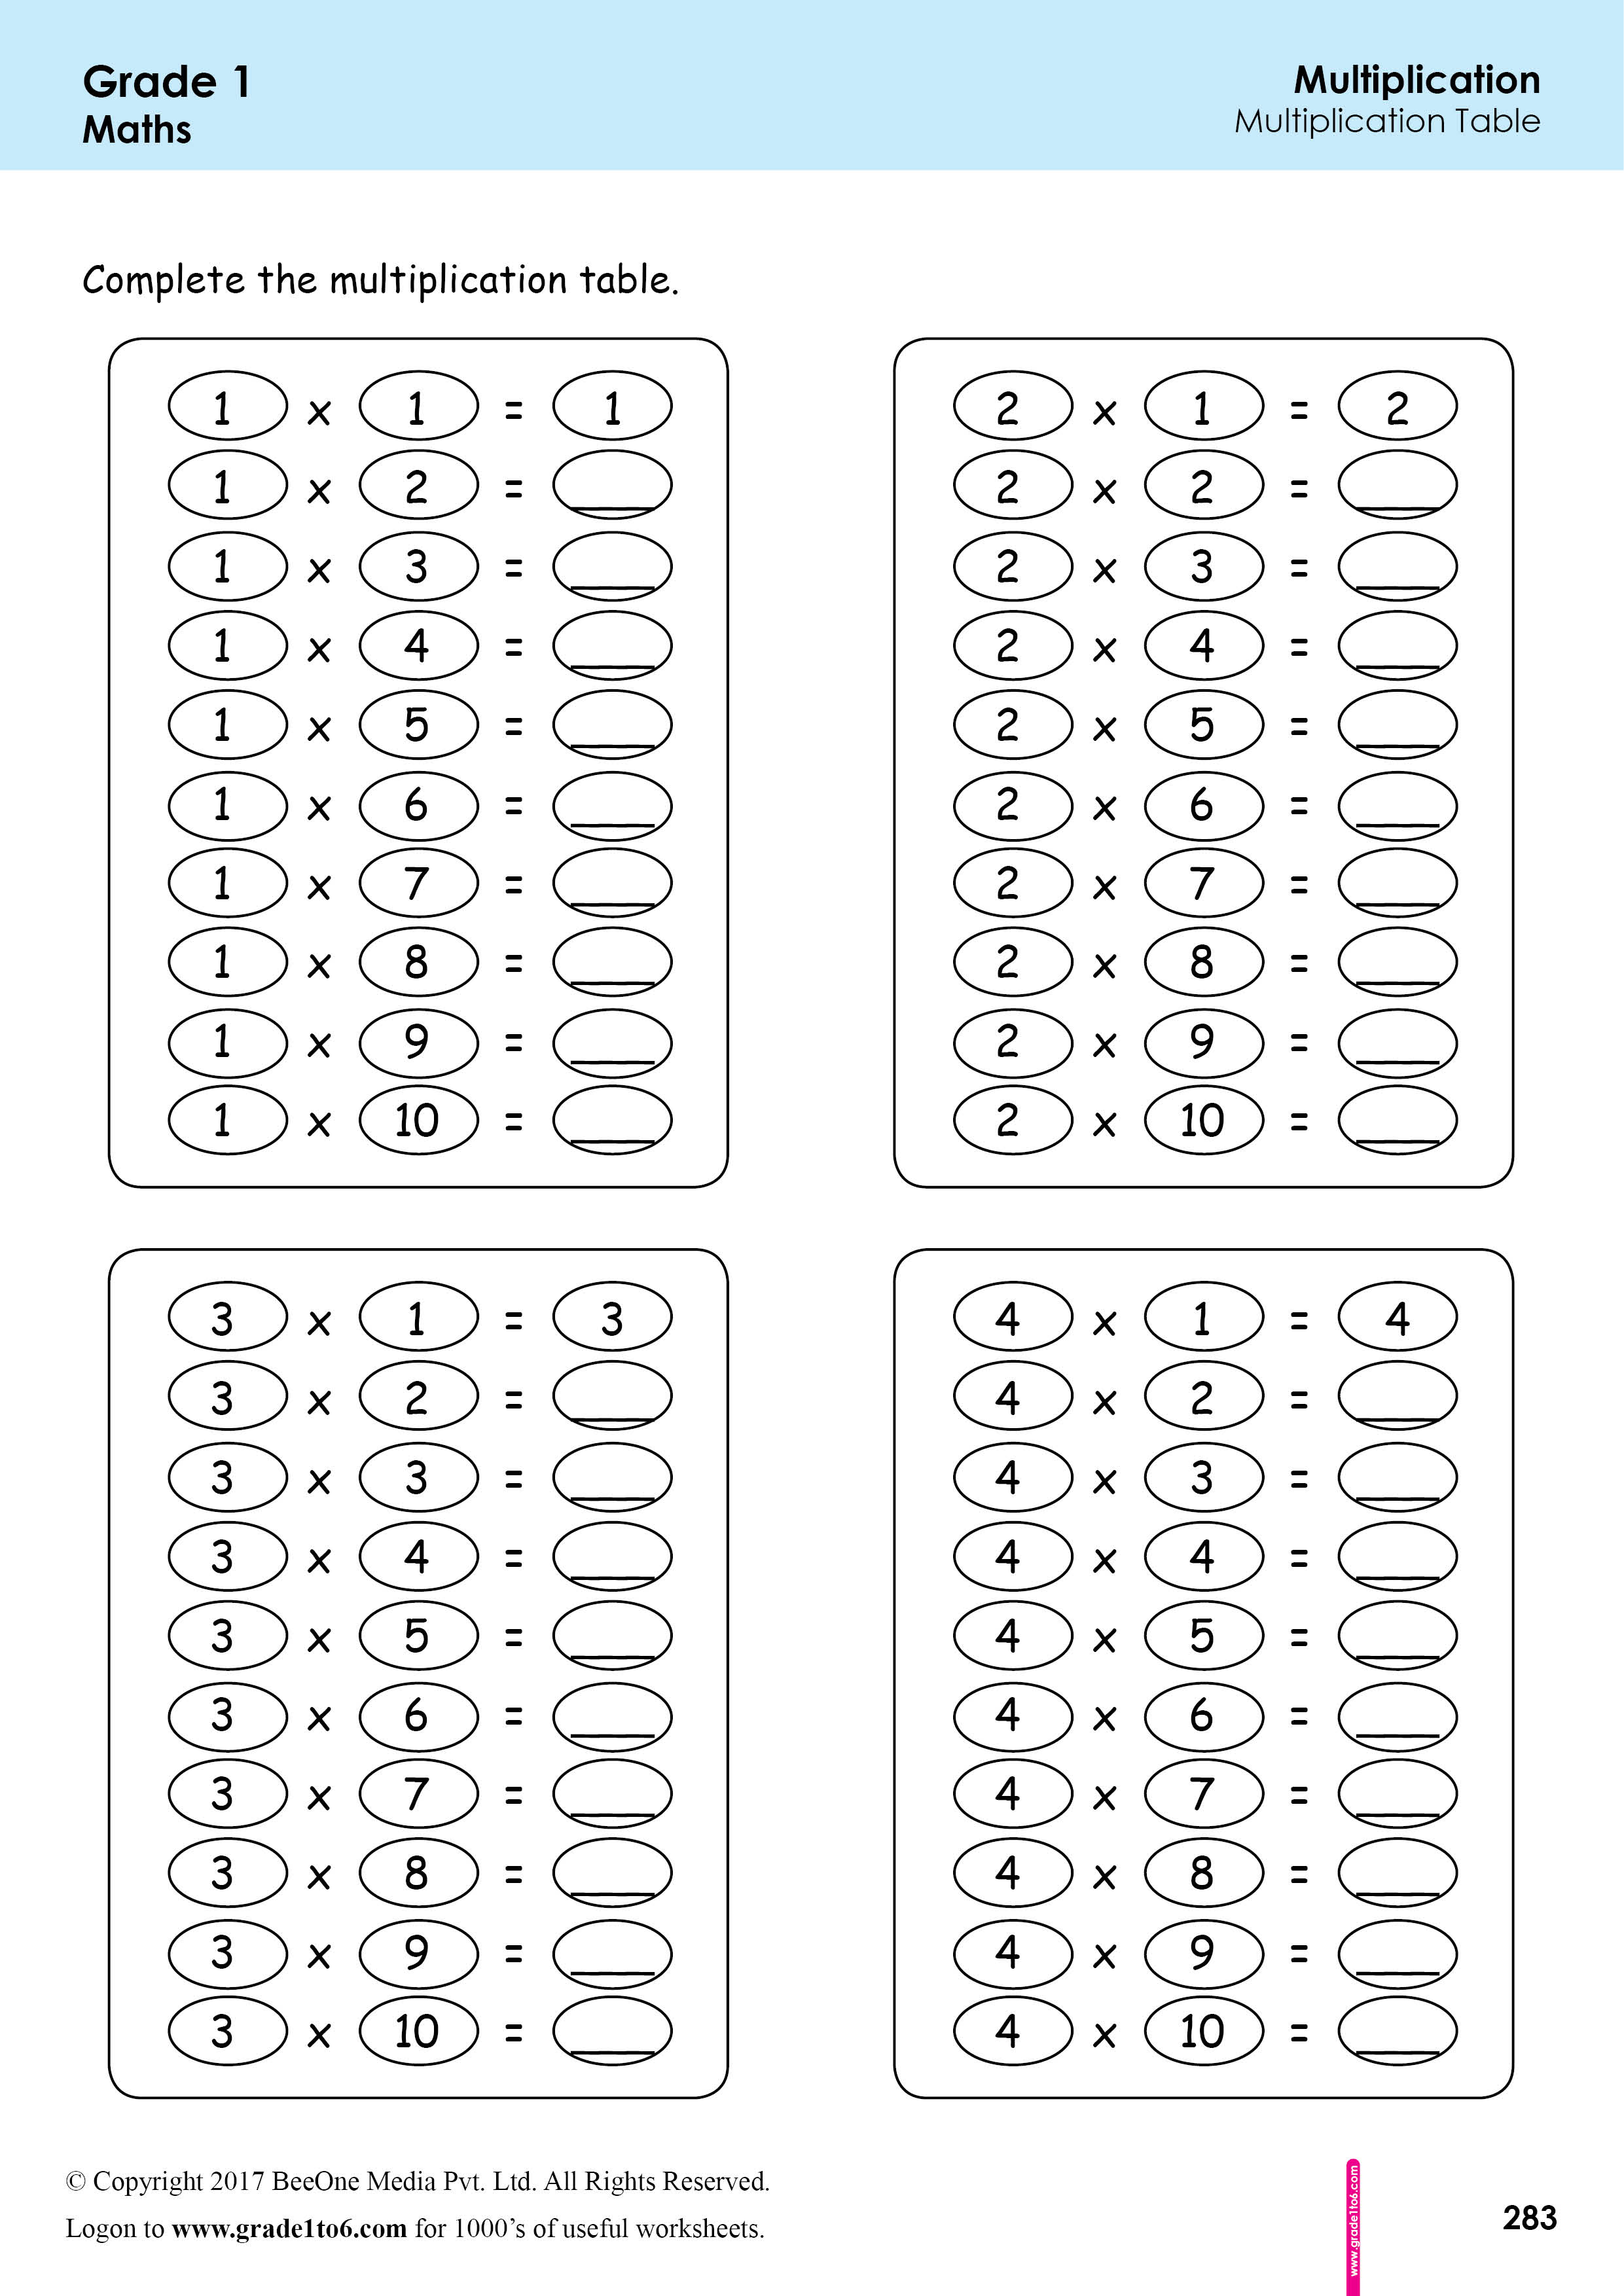 multiplication-tables-1-to-4-www-grade1to6